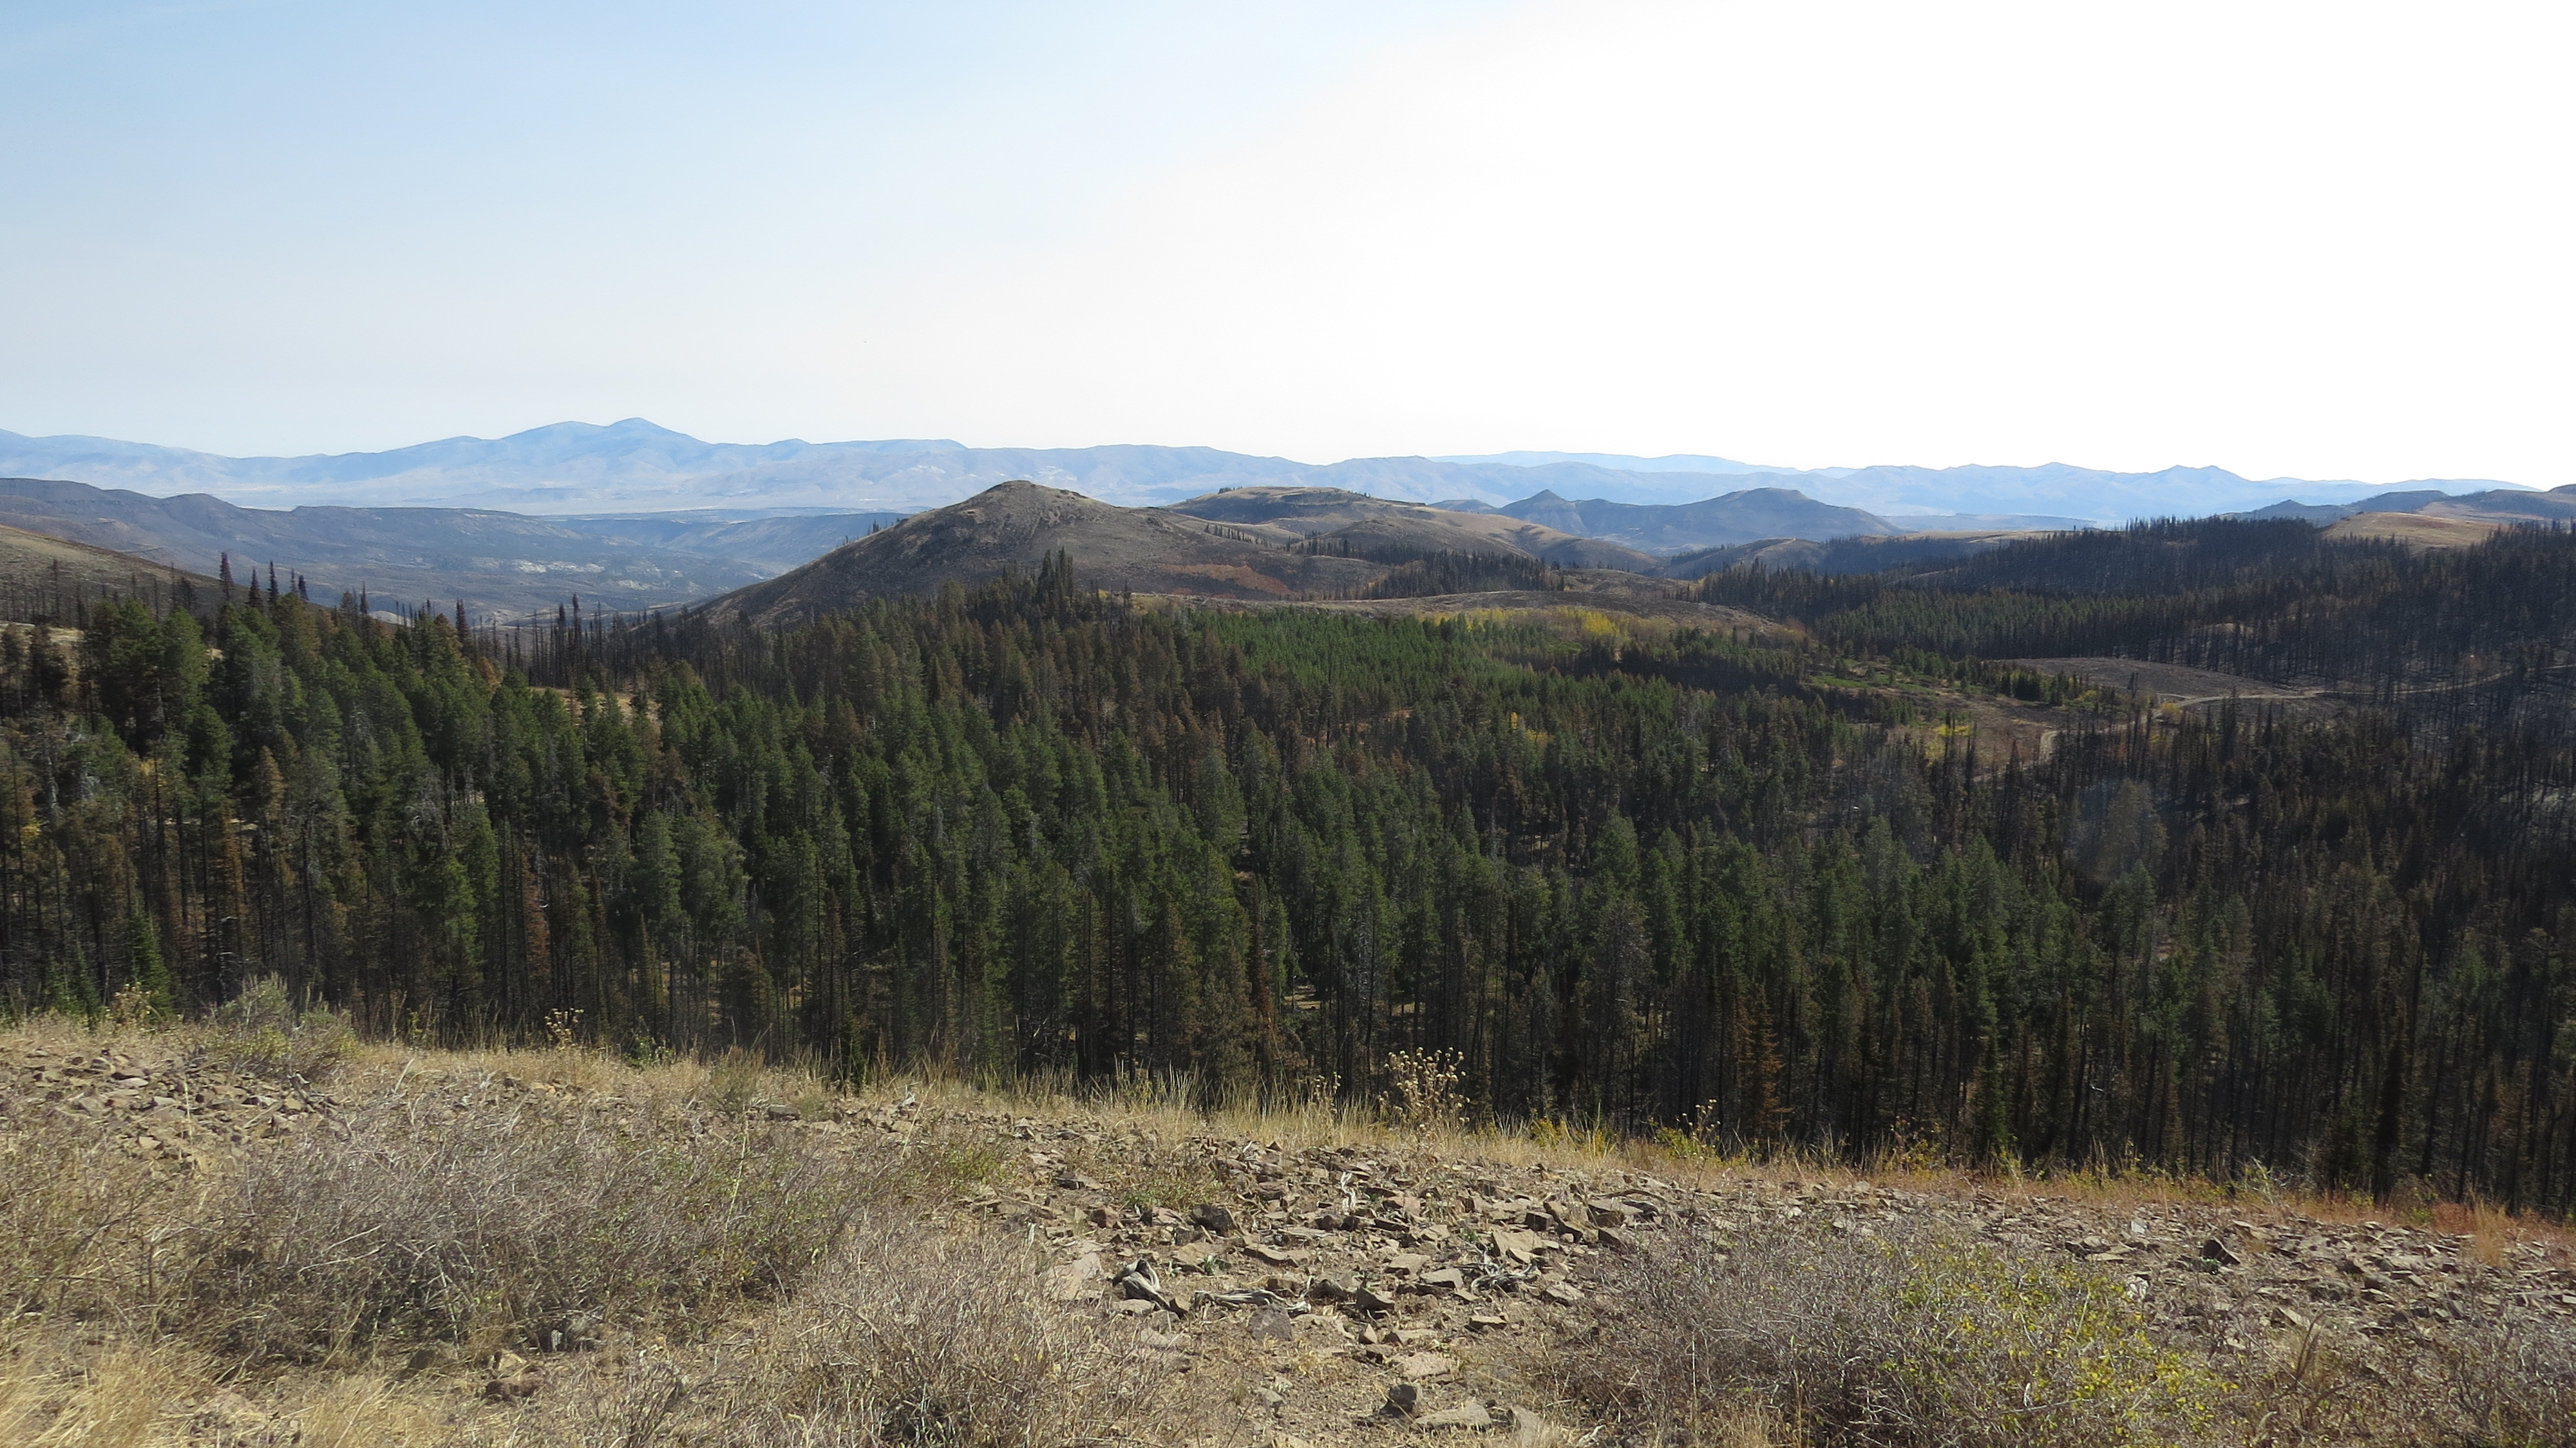 a wide vista shows pristine forest in the foreground and patches of burned forest in the background